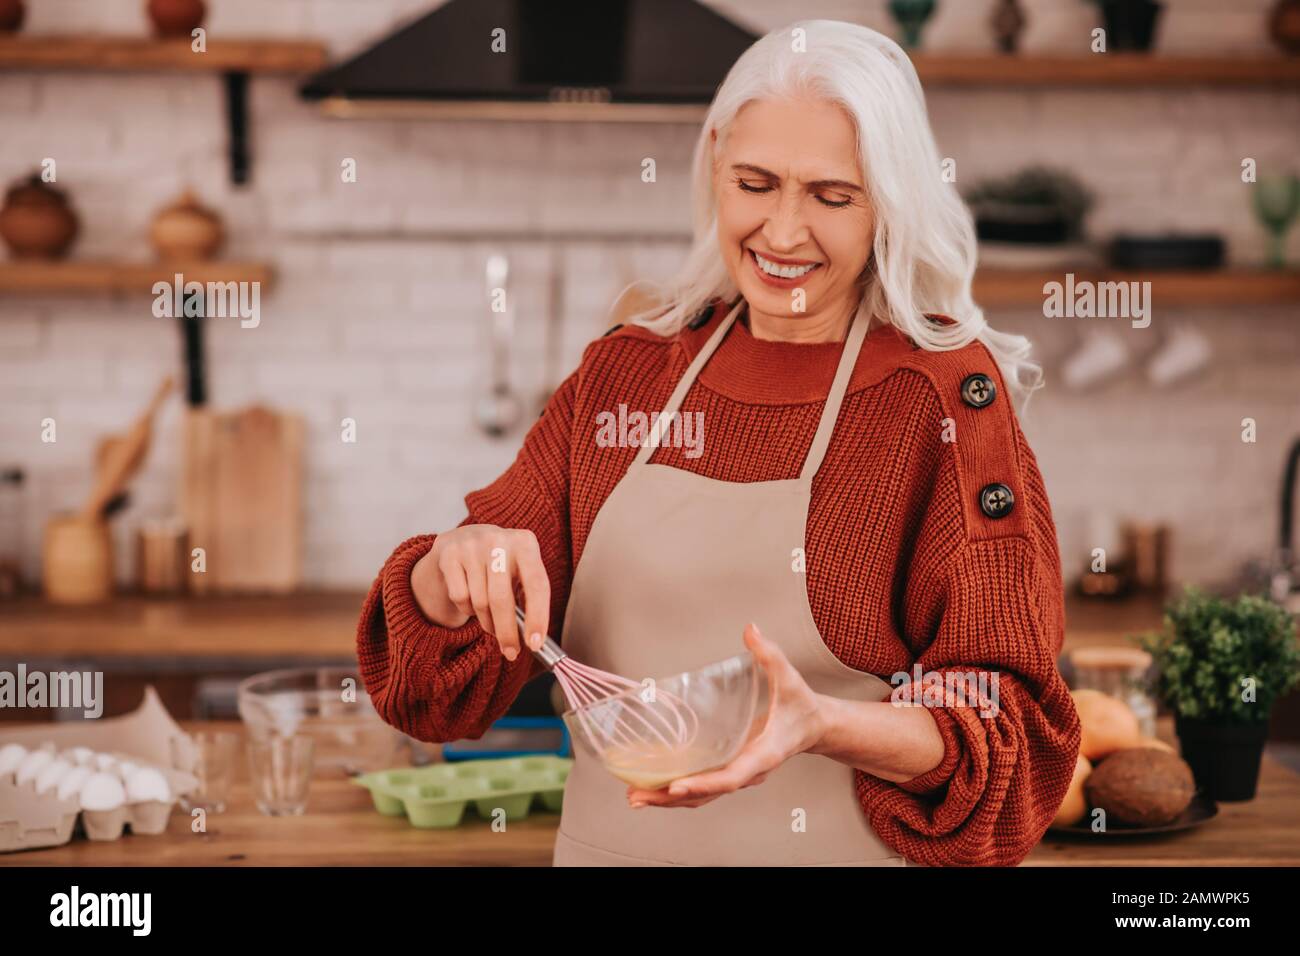 Grey-haired smiling lady whipping milk in a bowl Stock Photo